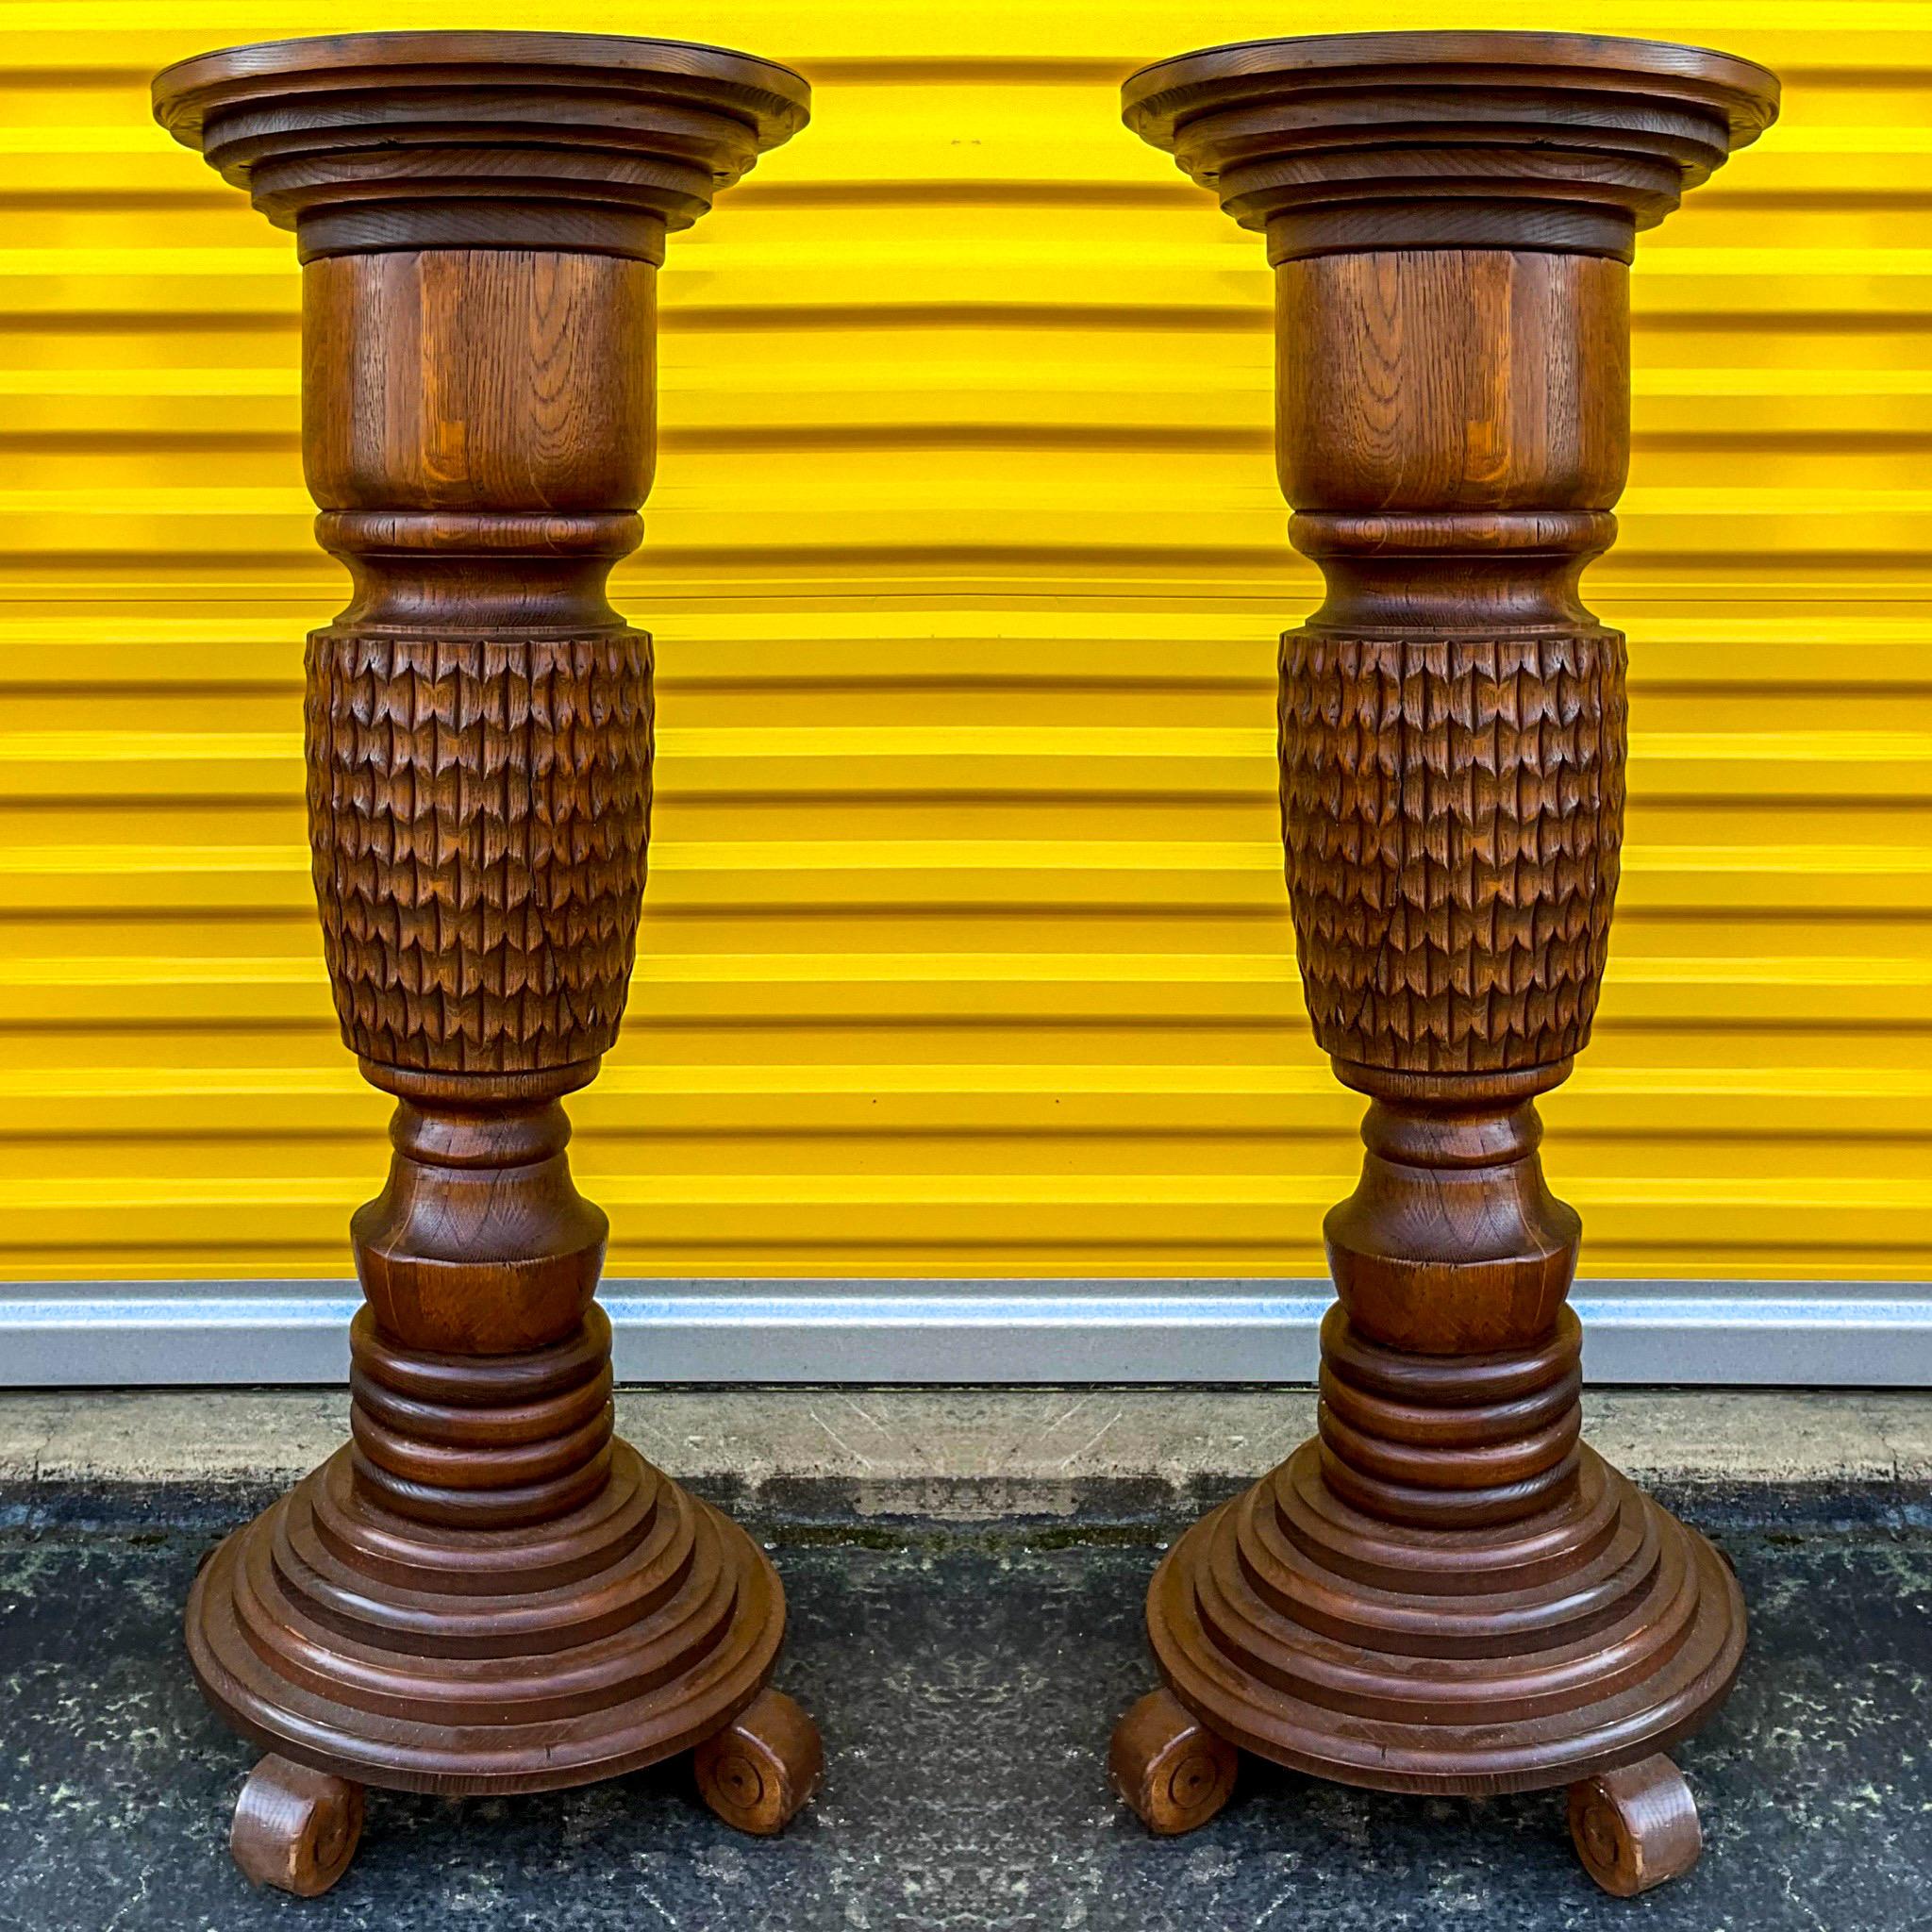 Early 20th-C. British Colonial Style Carved Oak Pineapple Form Pedestals -Pair In Good Condition For Sale In Kennesaw, GA